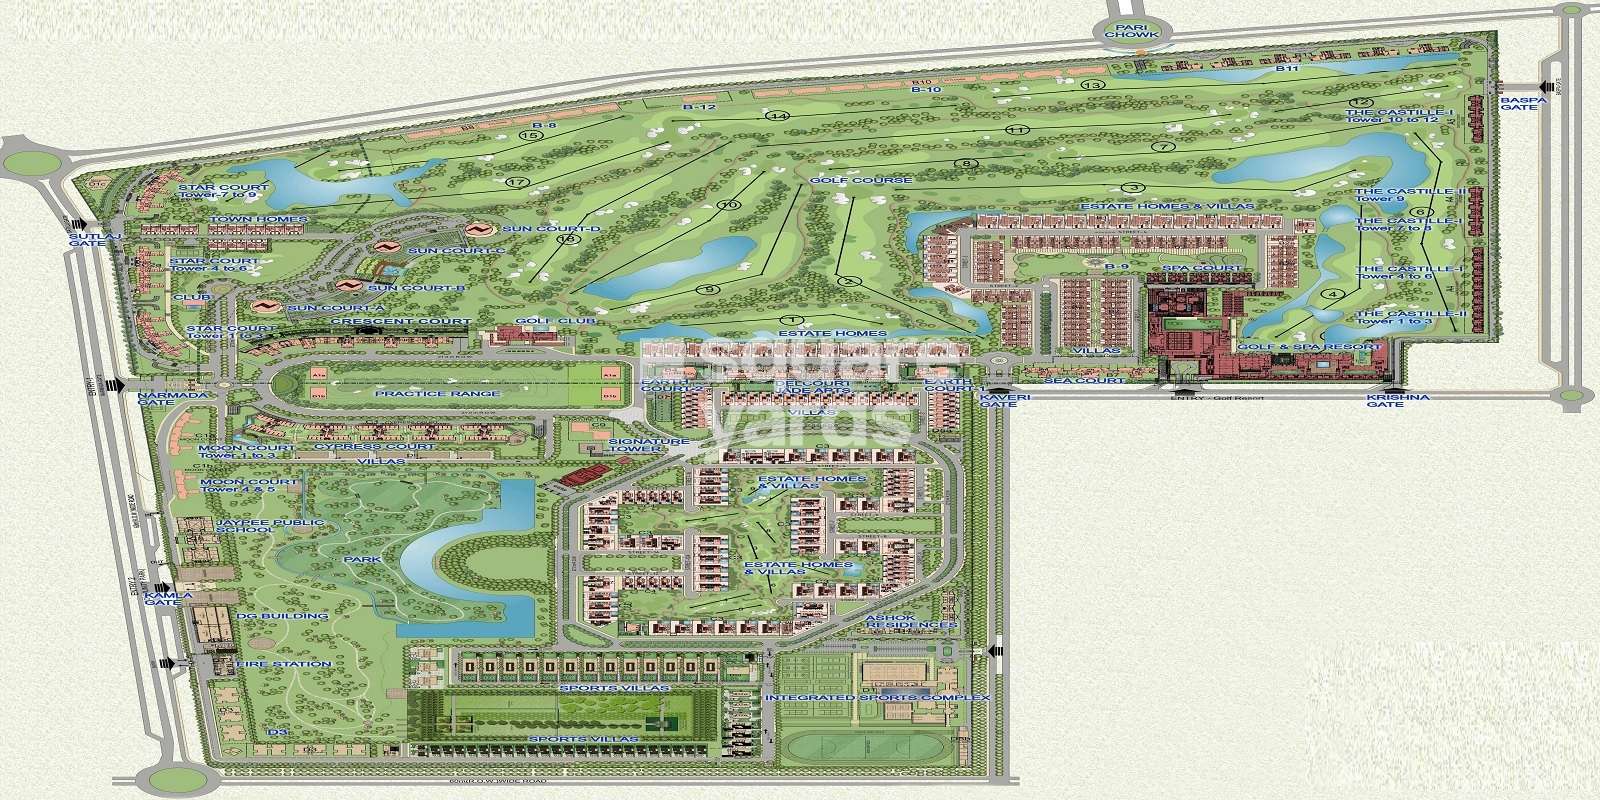 jaypee green the star court project master plan image1